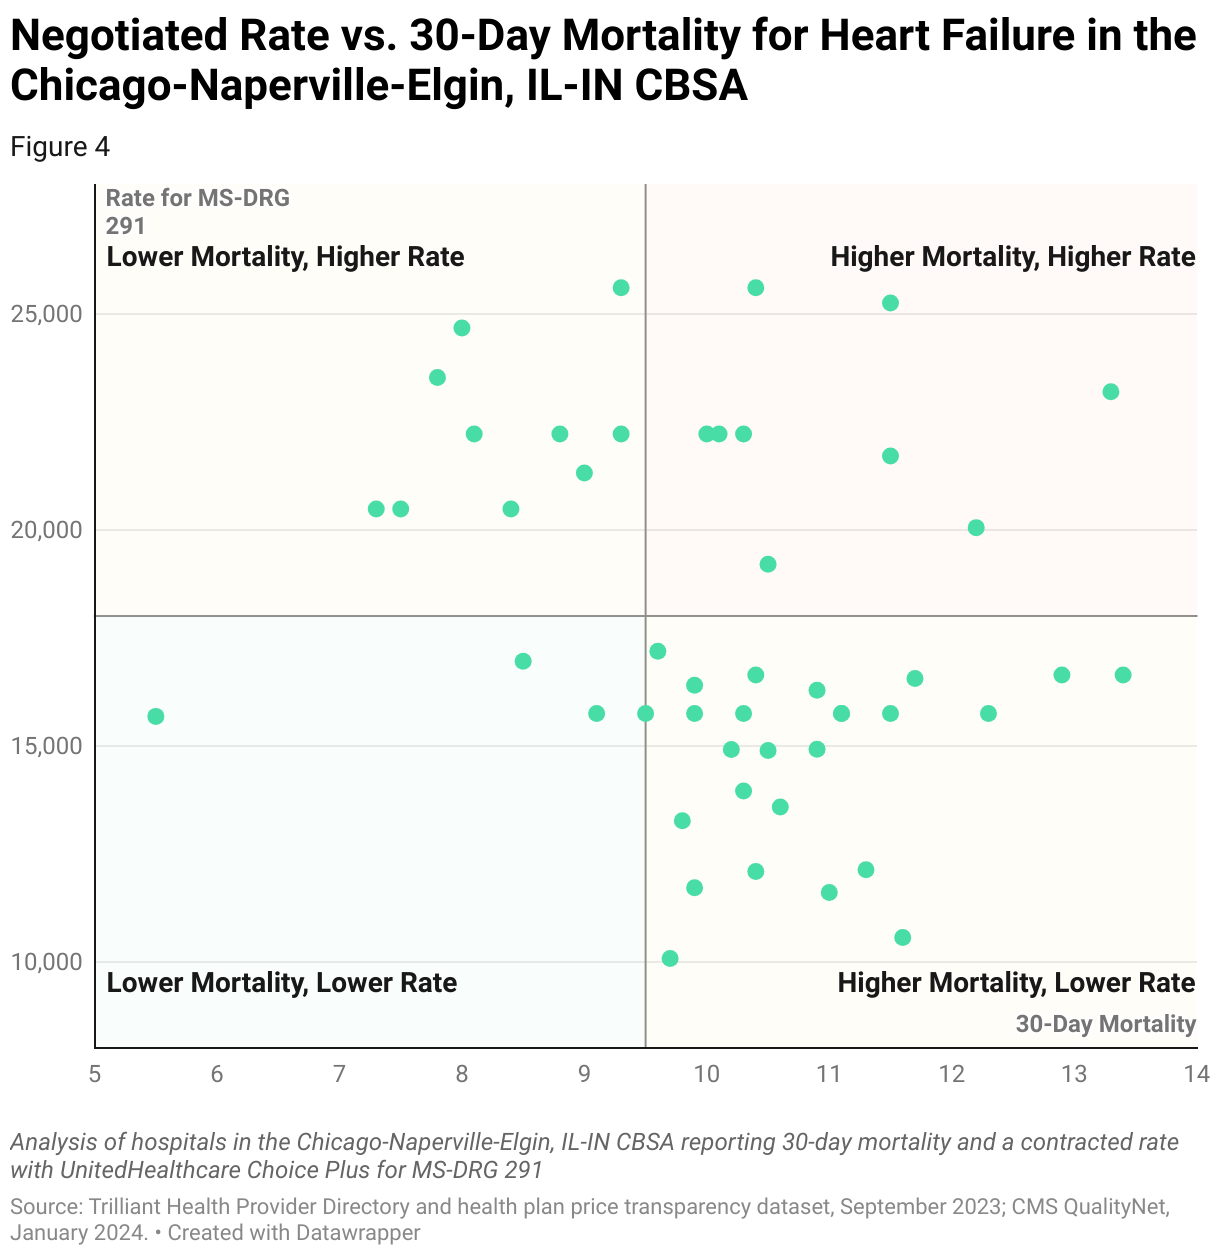 Chart comparing UnitedHealthcare Choice Plus in-network negotiated rates with 30-day post-discharge mortality for Heart Failure for hospitals in the Chicago-Naperville-Elgin, IL-IN CBSA